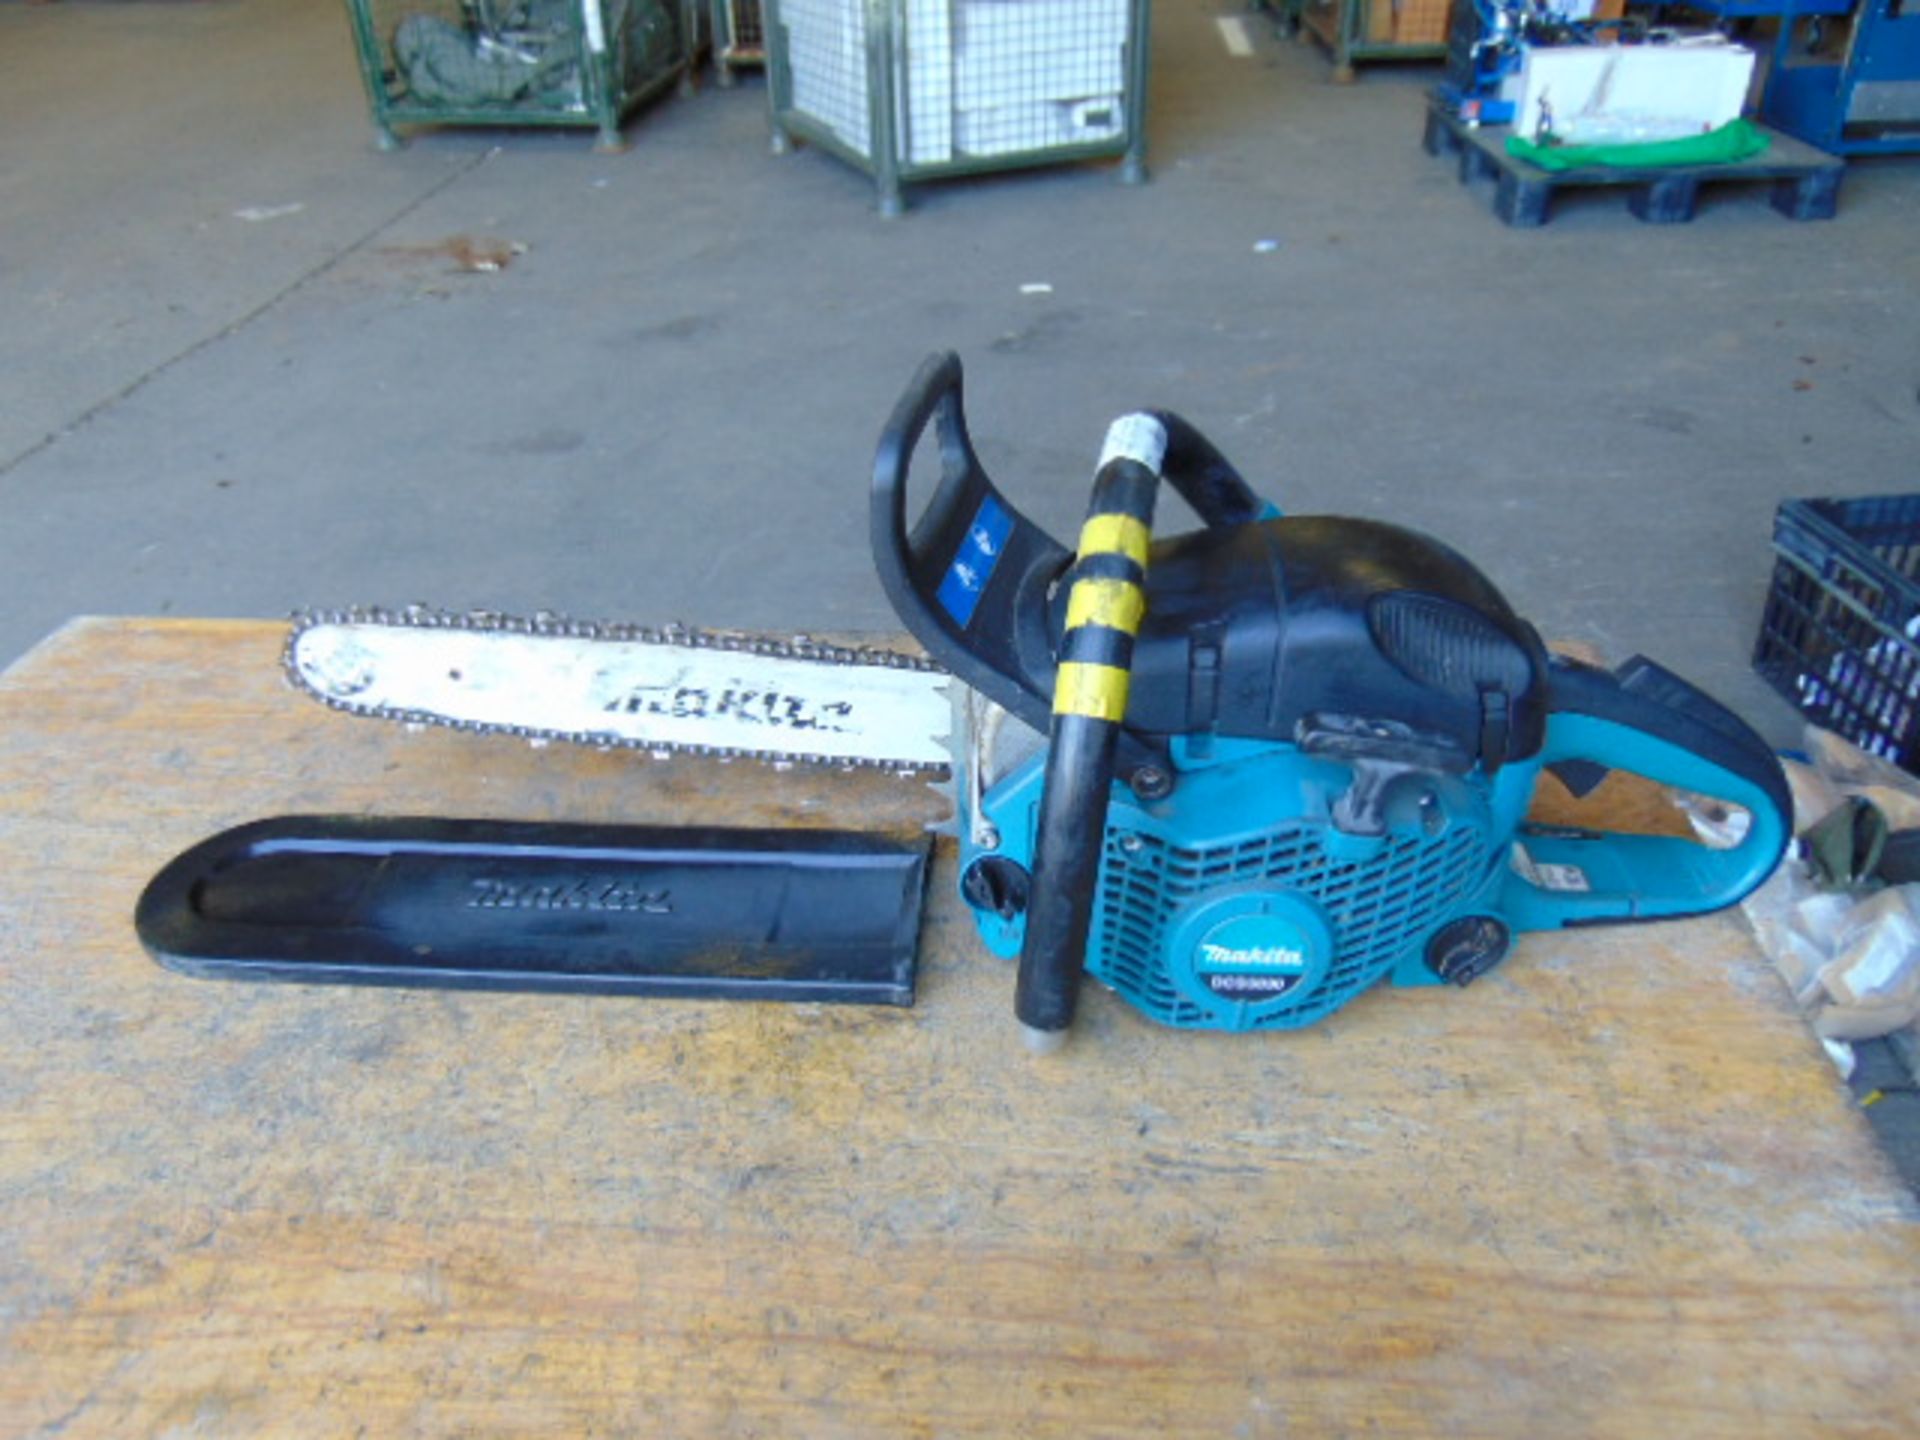 MAKITA DCS 5030 50CC Chainsaw c/w Chain Guard from MoD. - Image 7 of 7